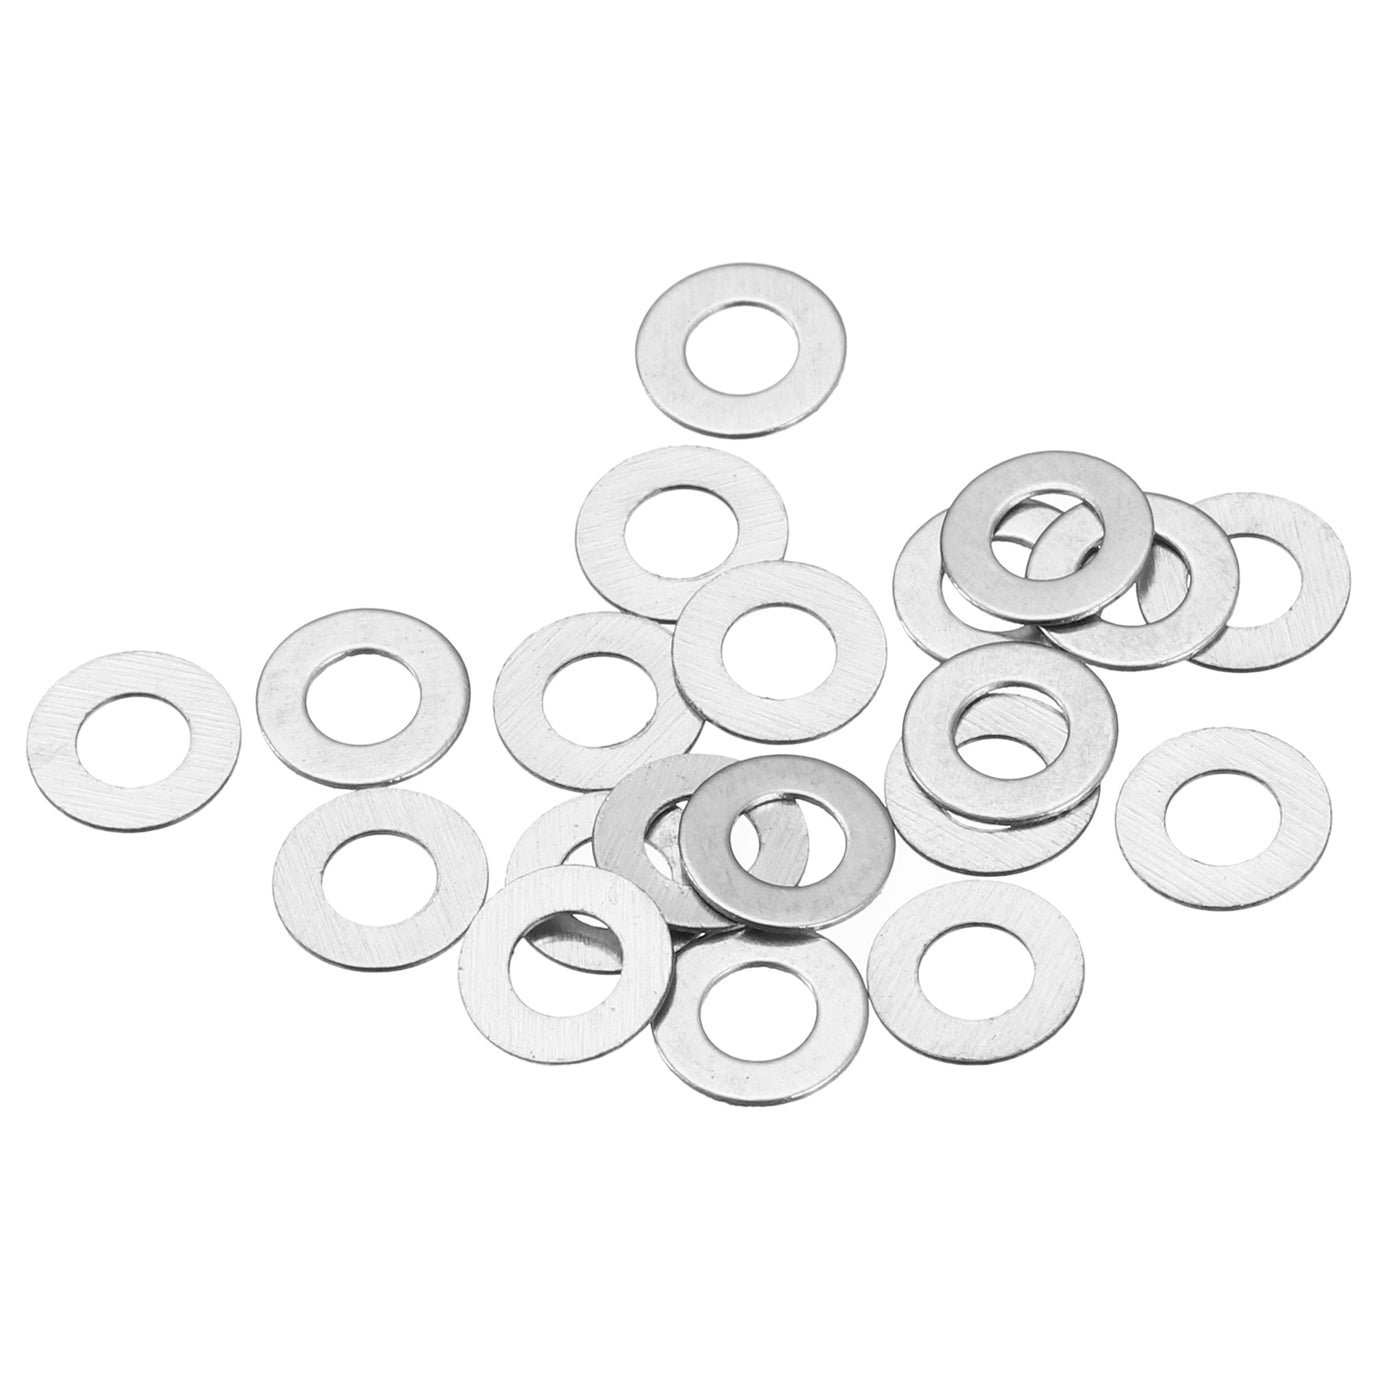 uxcell Uxcell M3 304 Stainless Steel Flat Washers, 20pcs 3x6x0.5mm Ultra Thin Flat Spacers